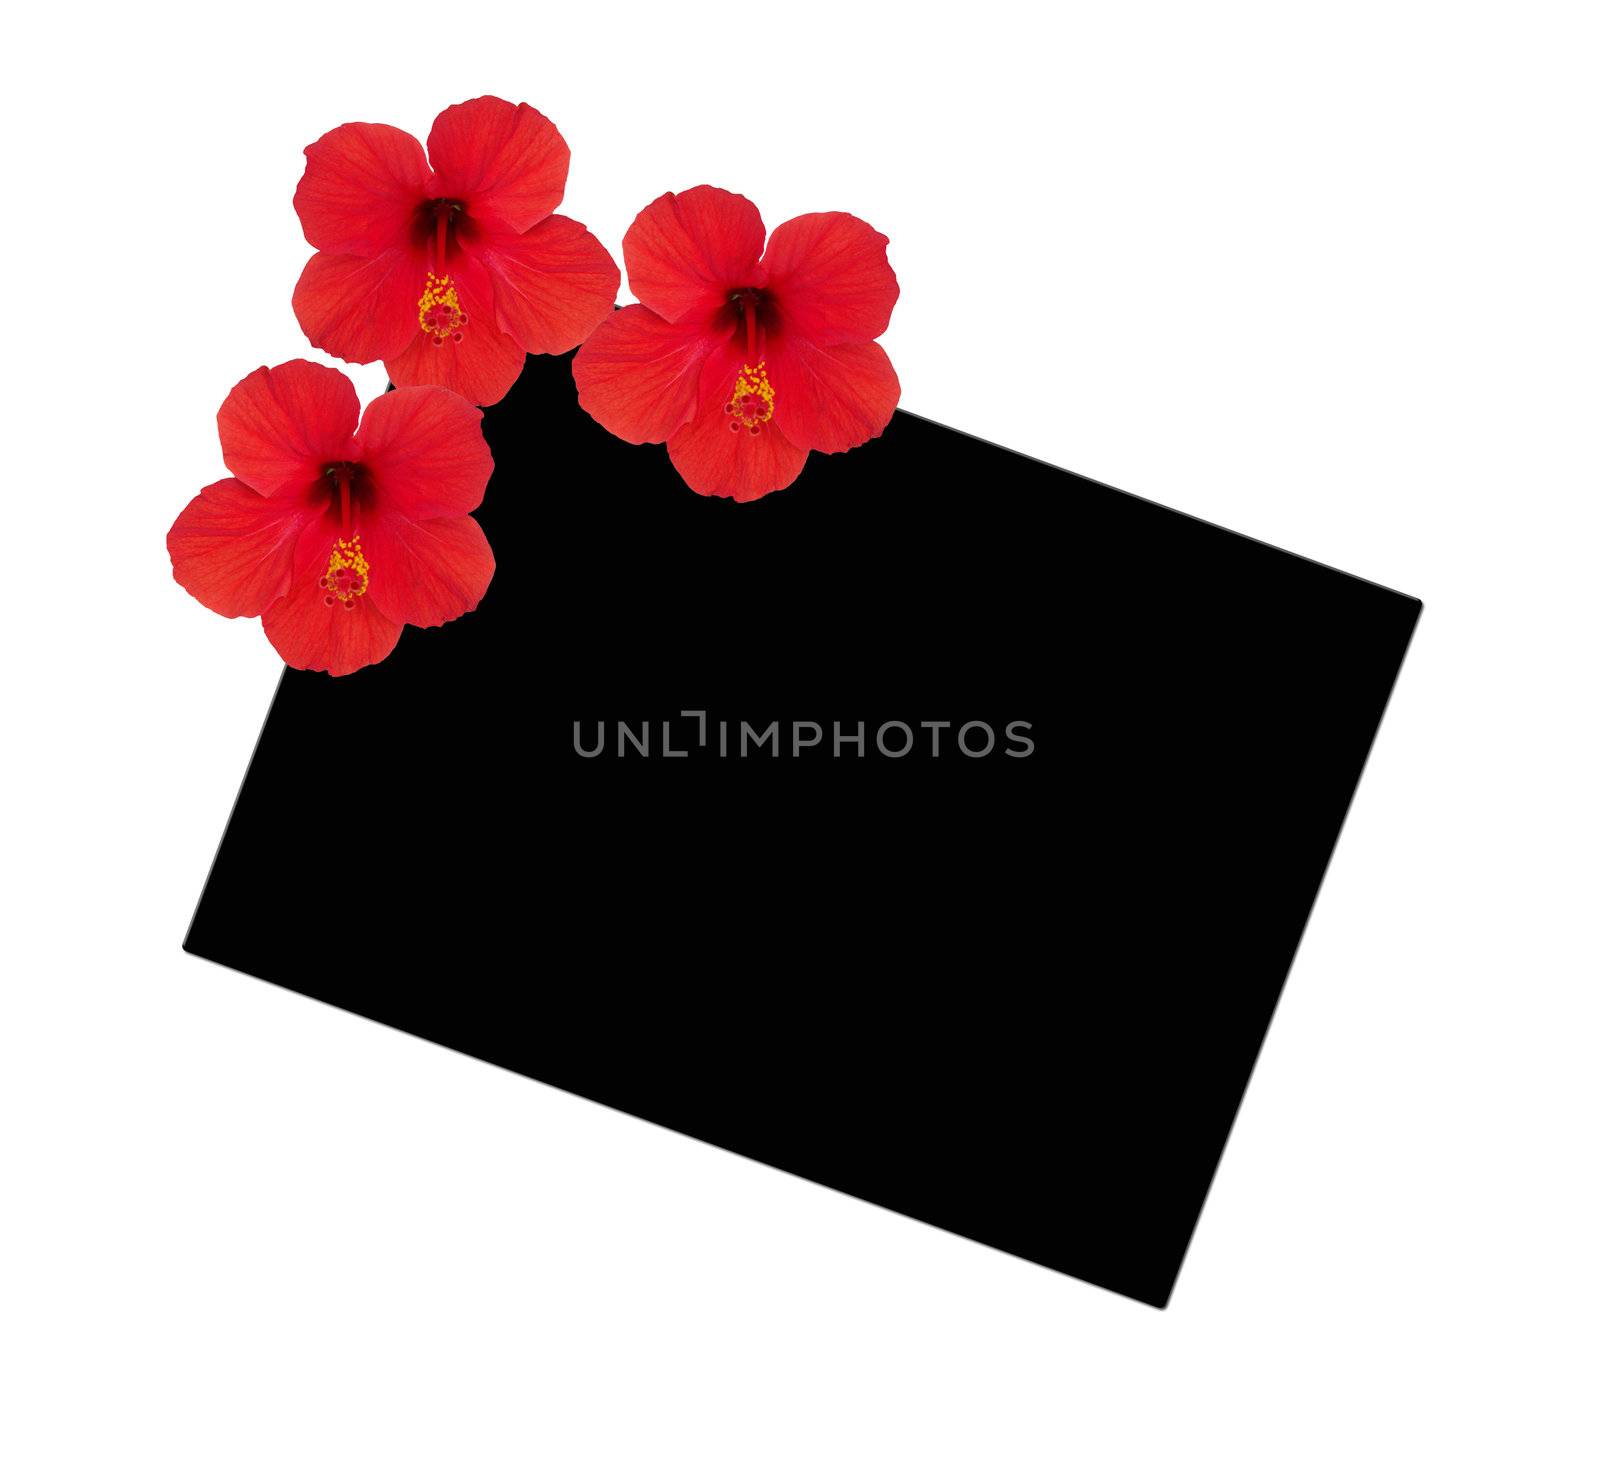 Framework from three flowers hibiscus on a background of a black rectangular